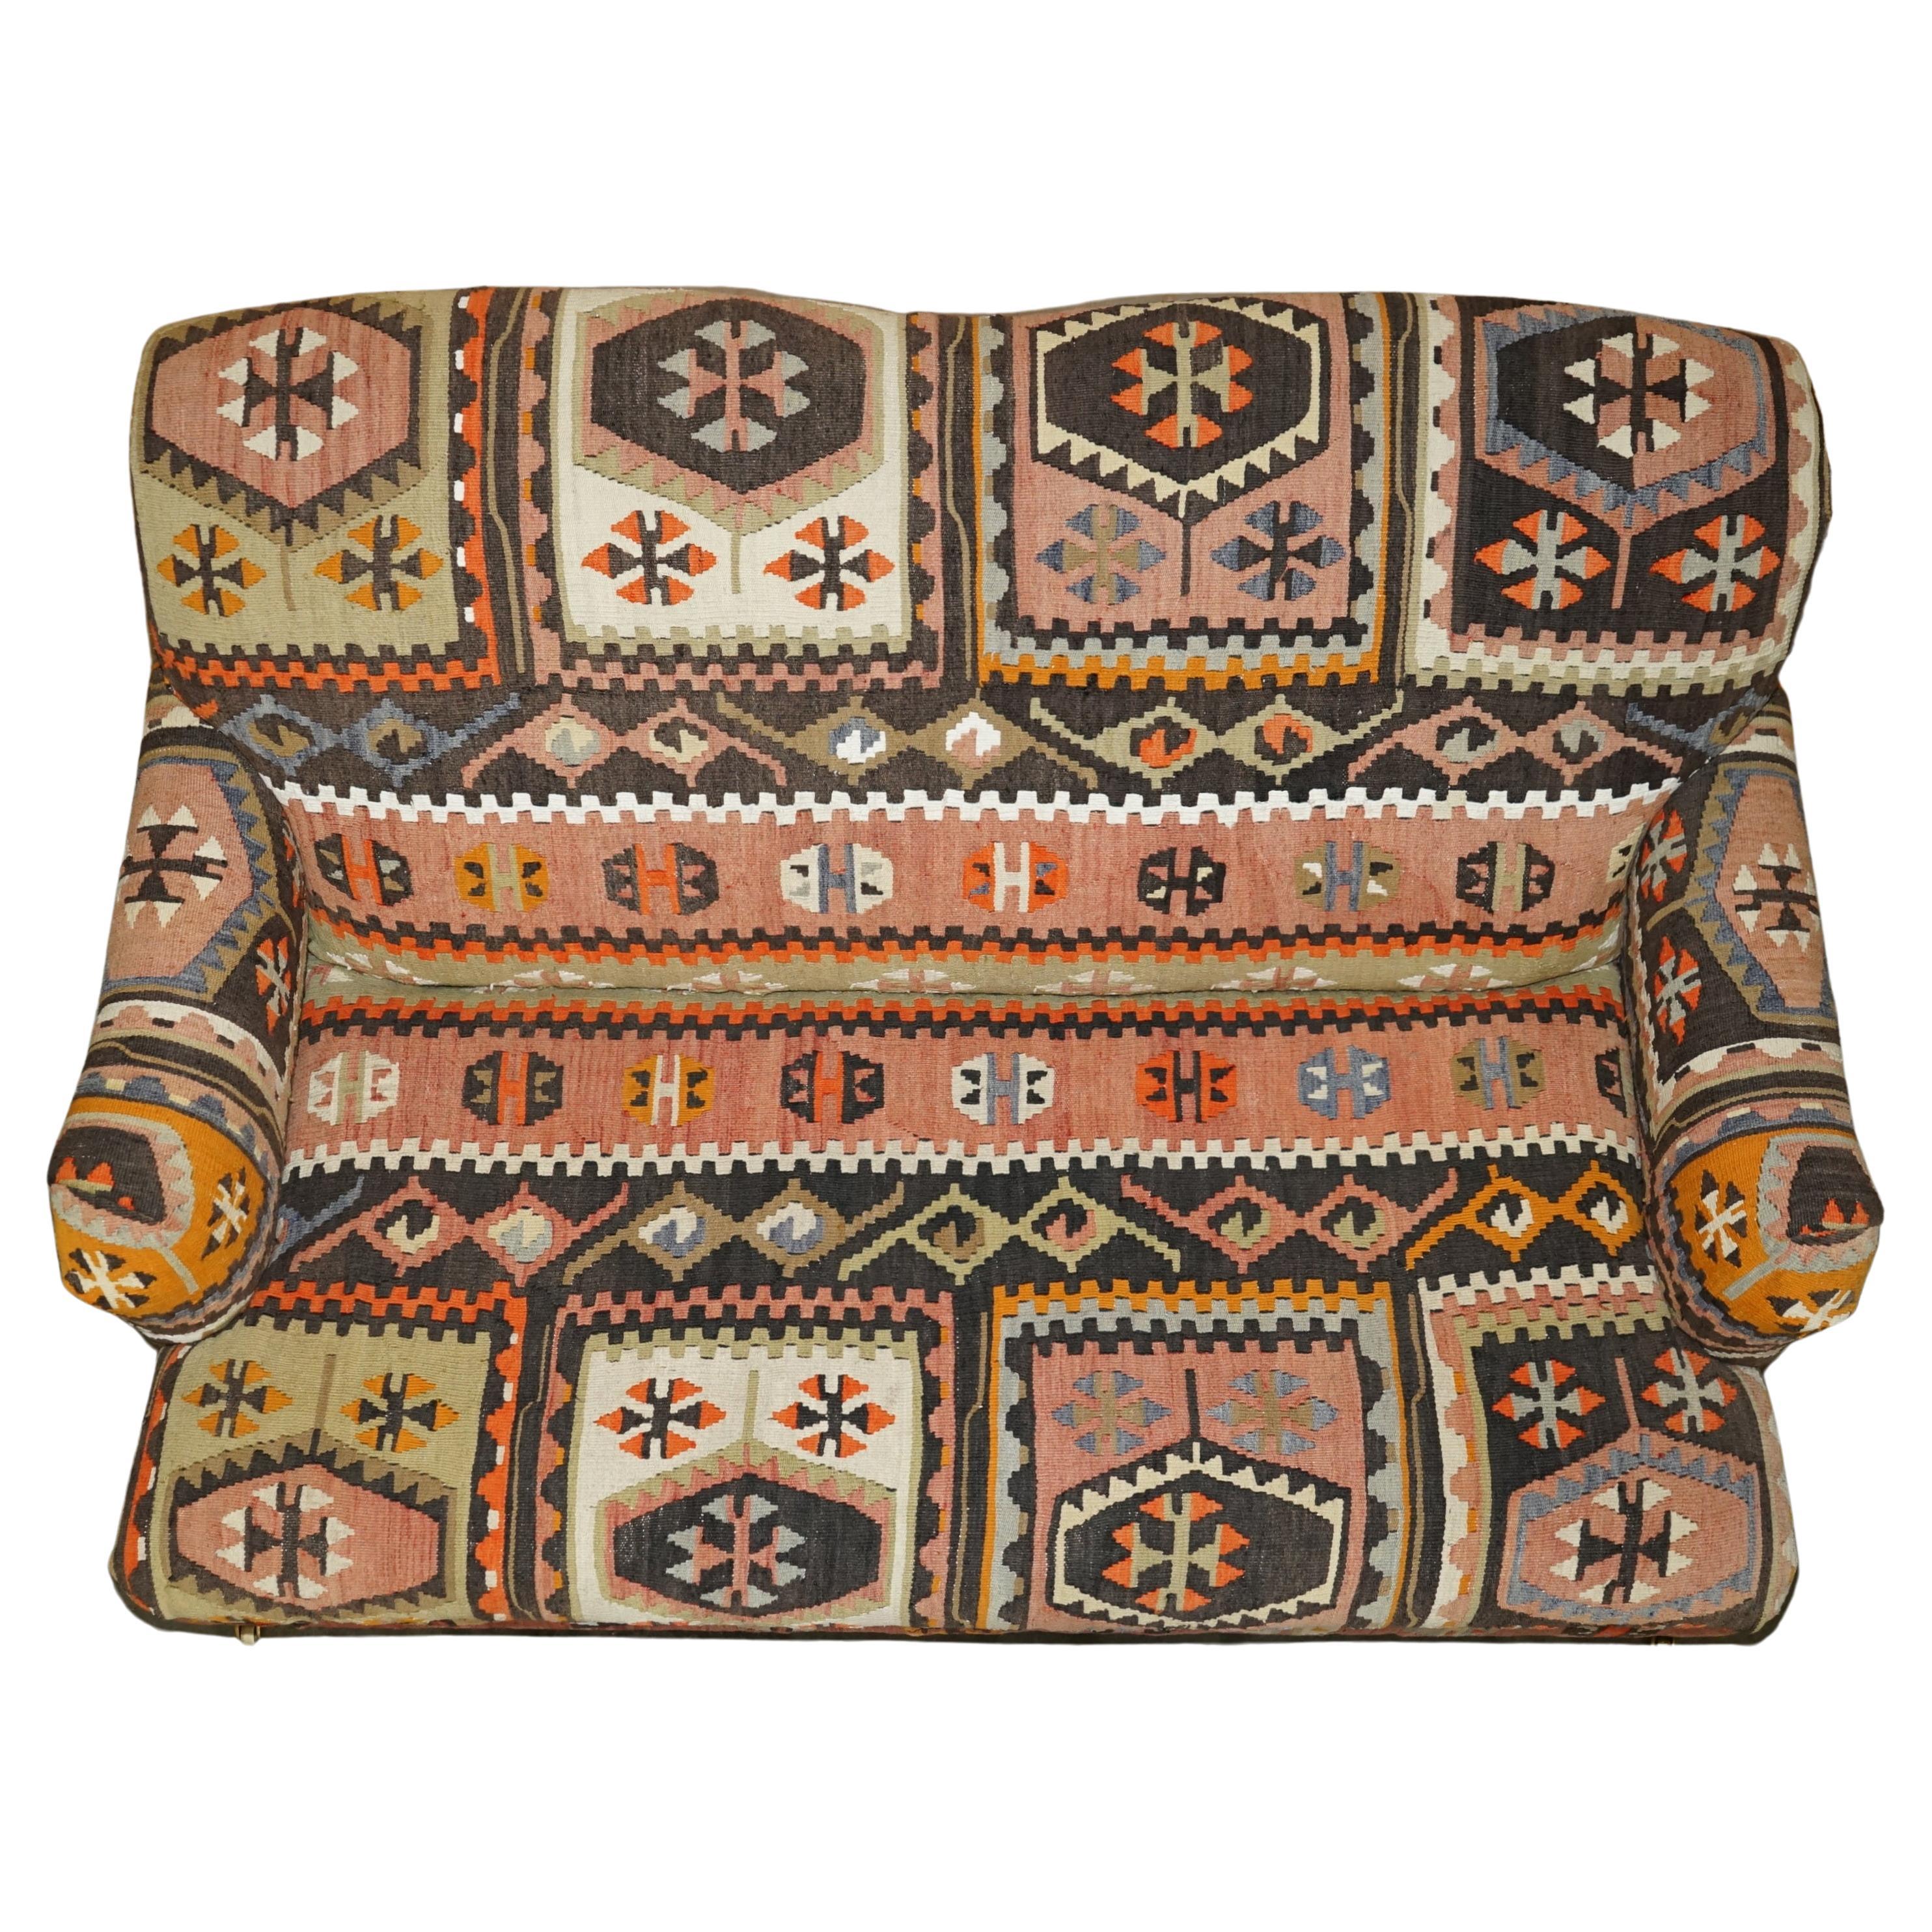 Royal House Antiques

Royal House Antiques is delighted to offer for sale this sublime original George Smith signature collection standard arm two-seat sofa upholstered with Aztec Kilims

Please note the delivery fee listed is just a guide, it